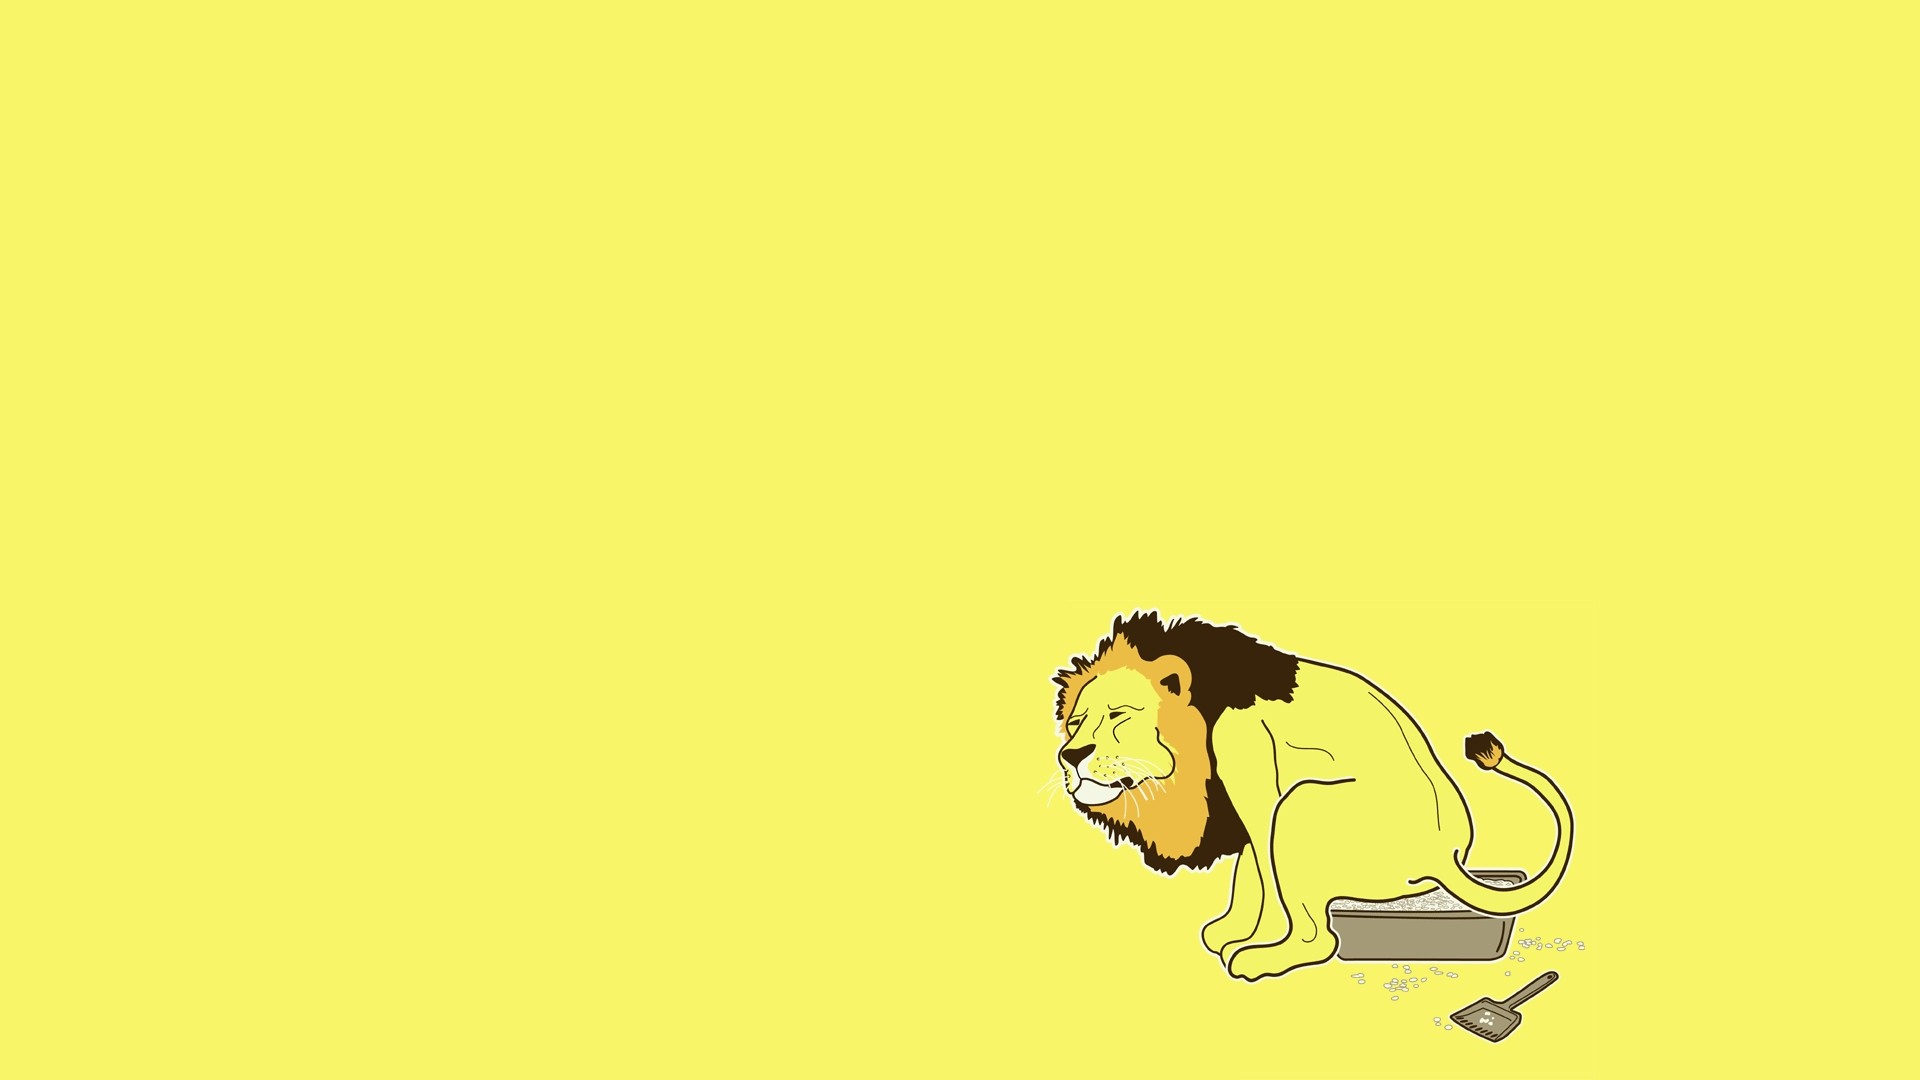 General 1920x1080 humor lion yellow minimalism simple background